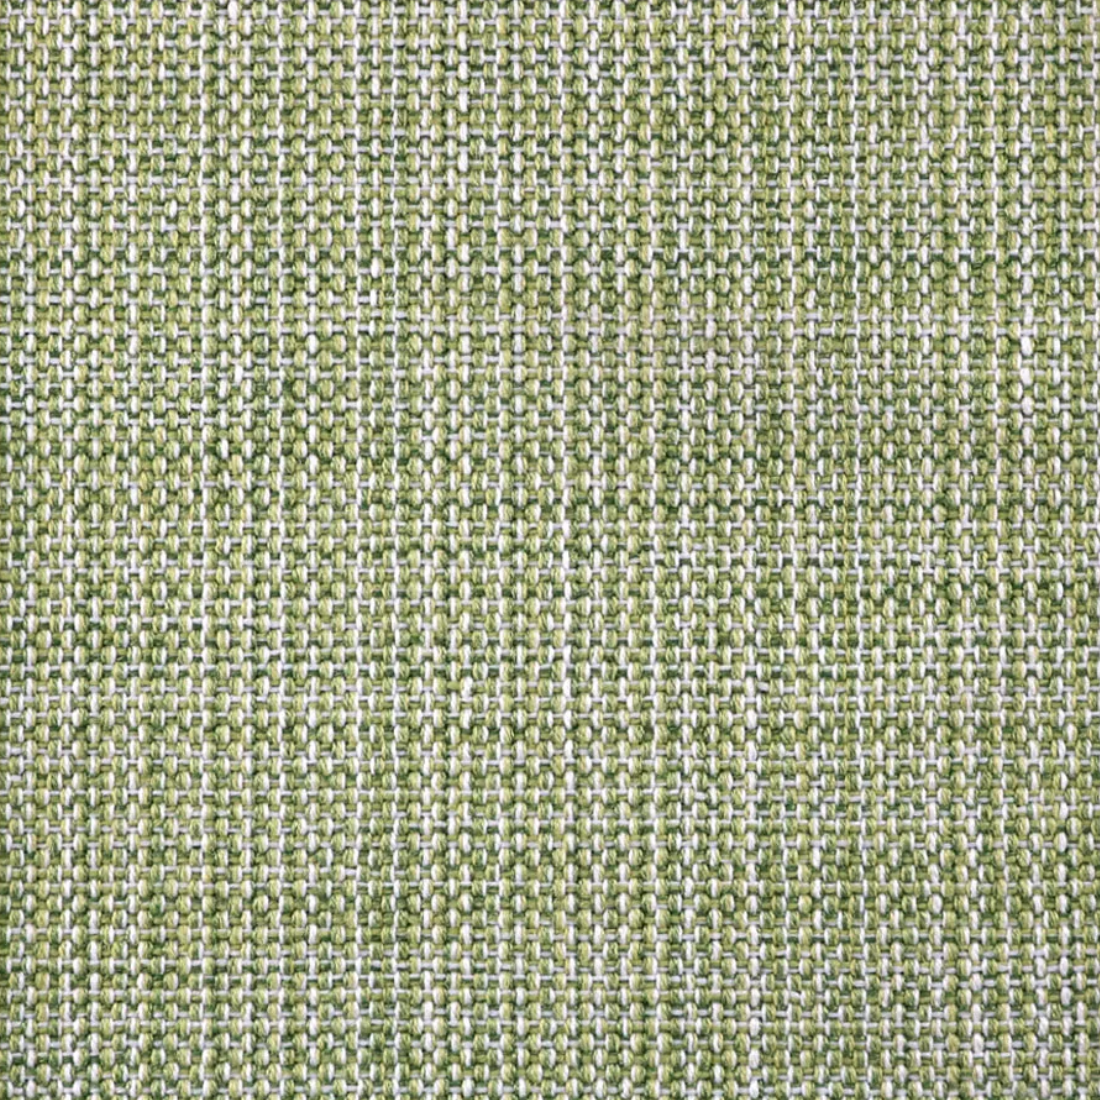 Spring Special Danielle Rollins Selected Avasso Rug